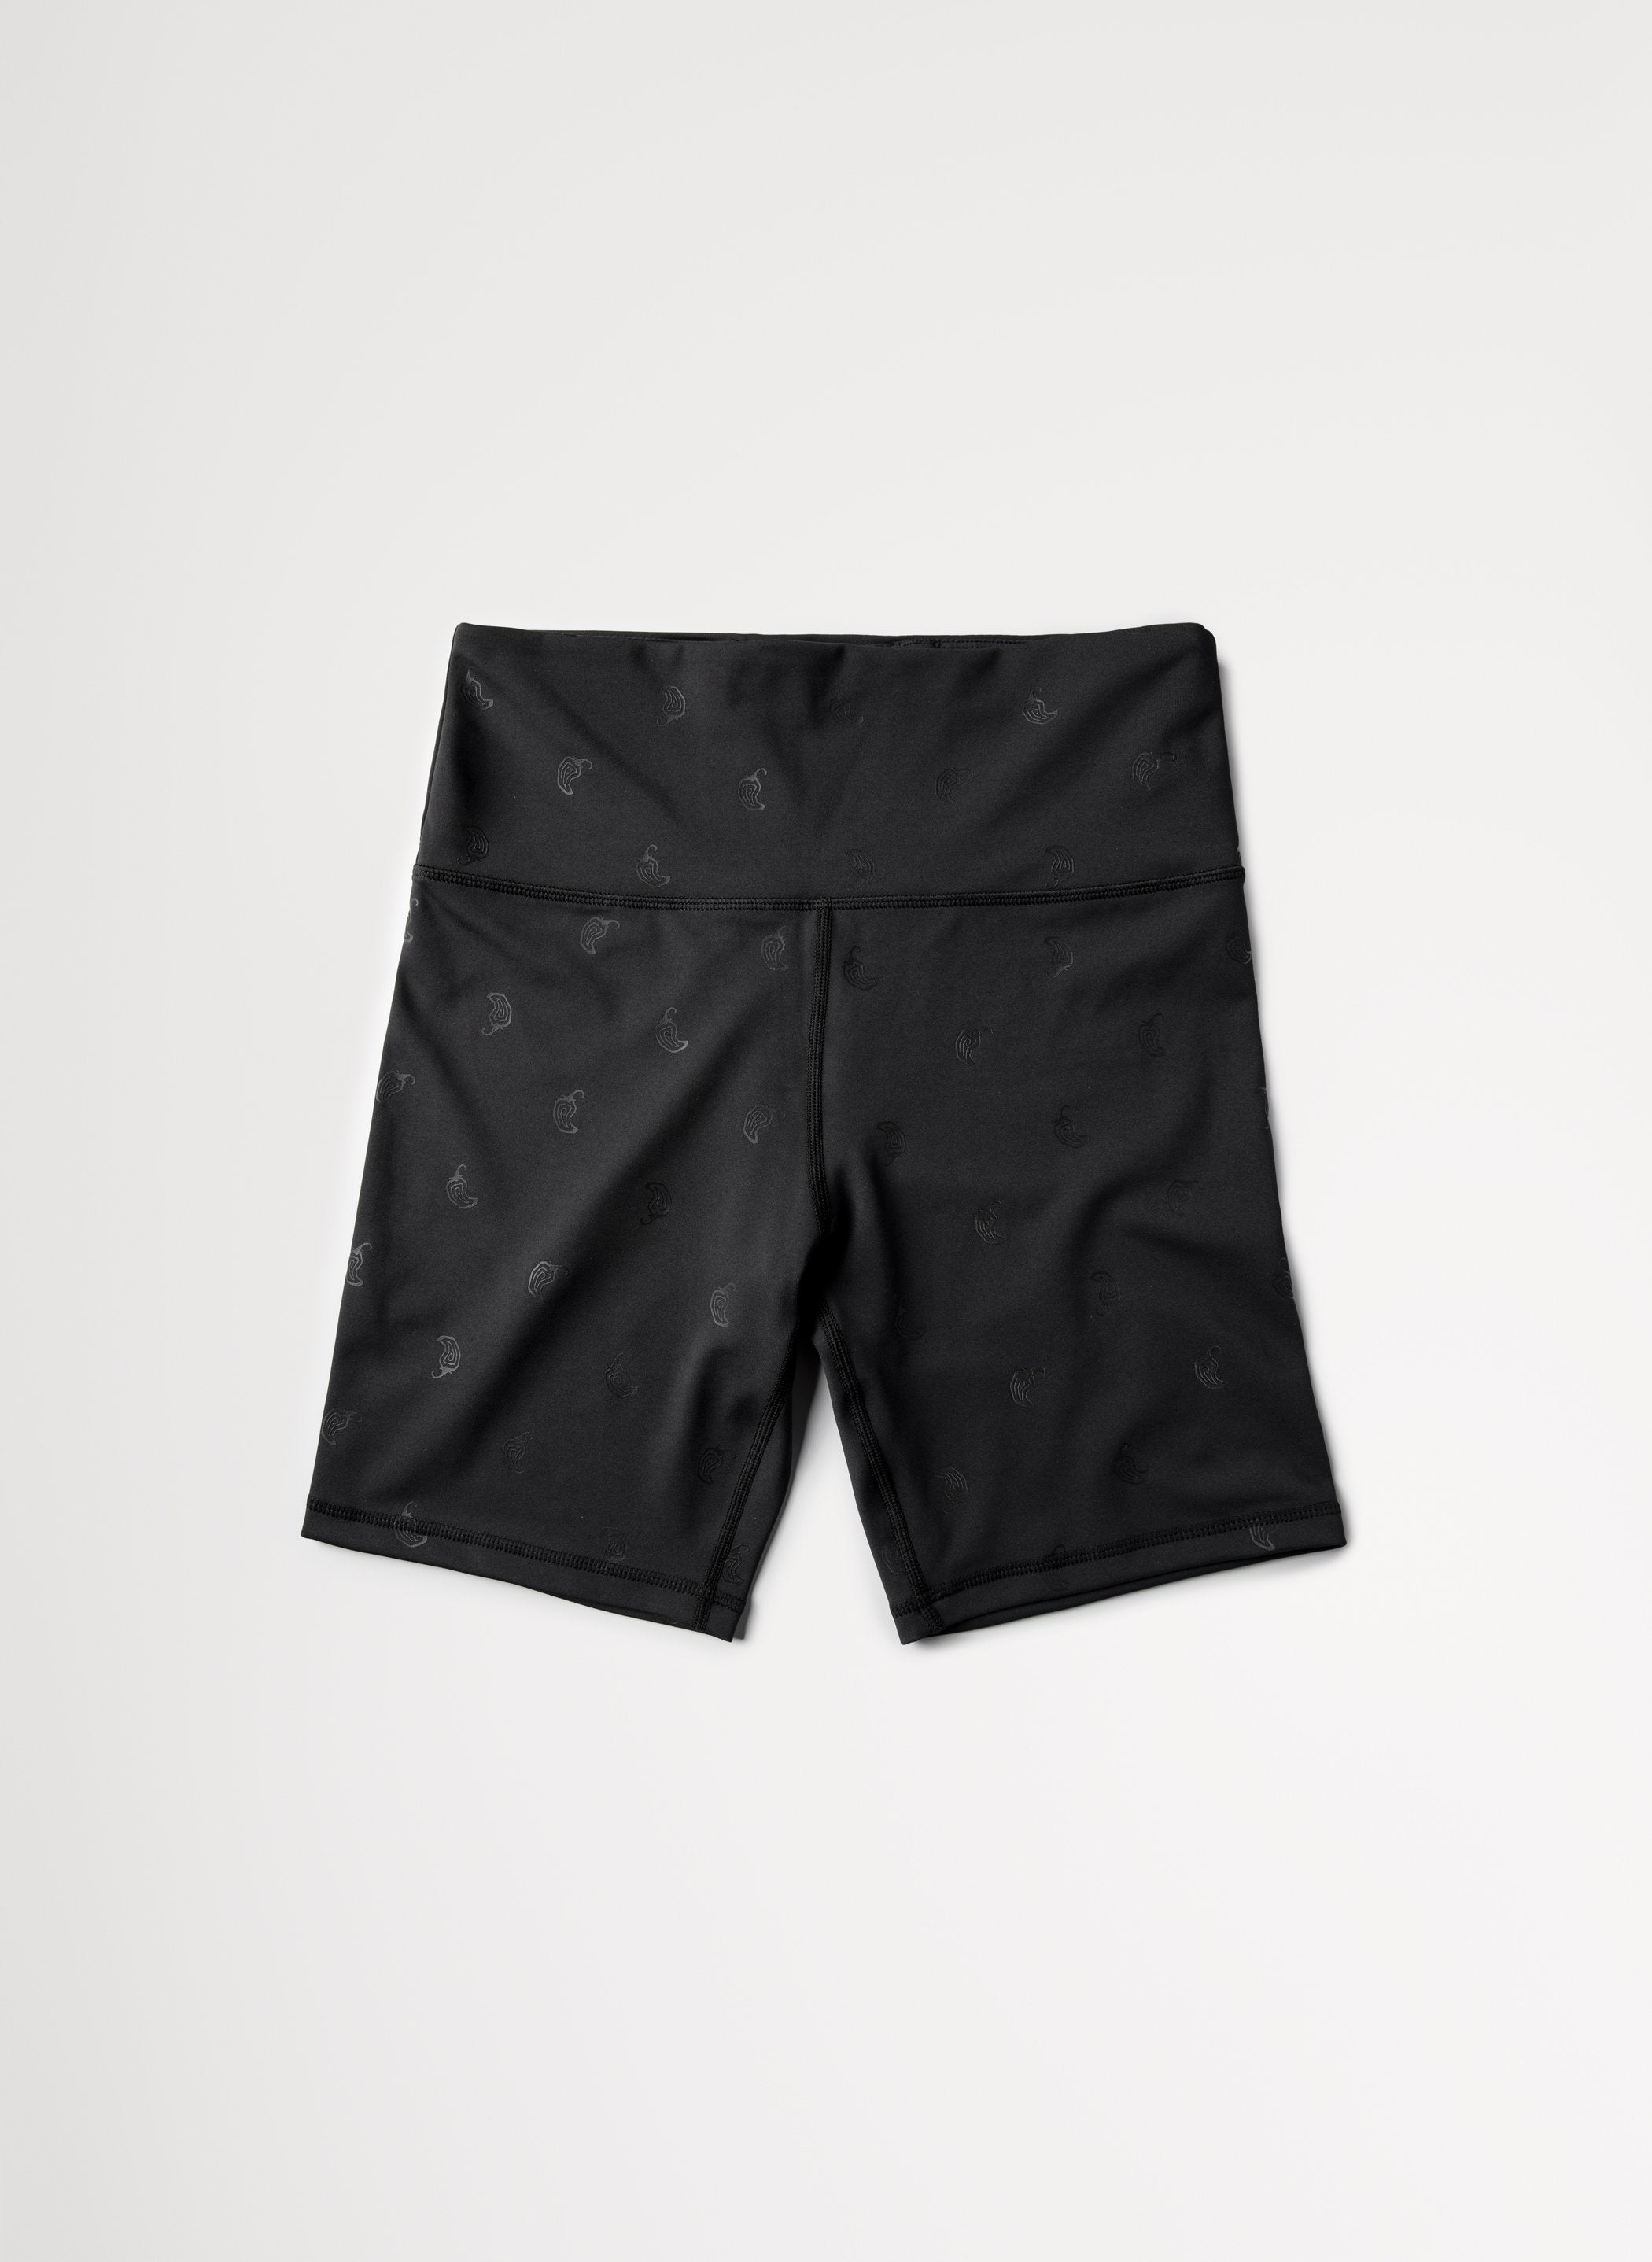 Women's Chipotle Pepper Athletic Shorts